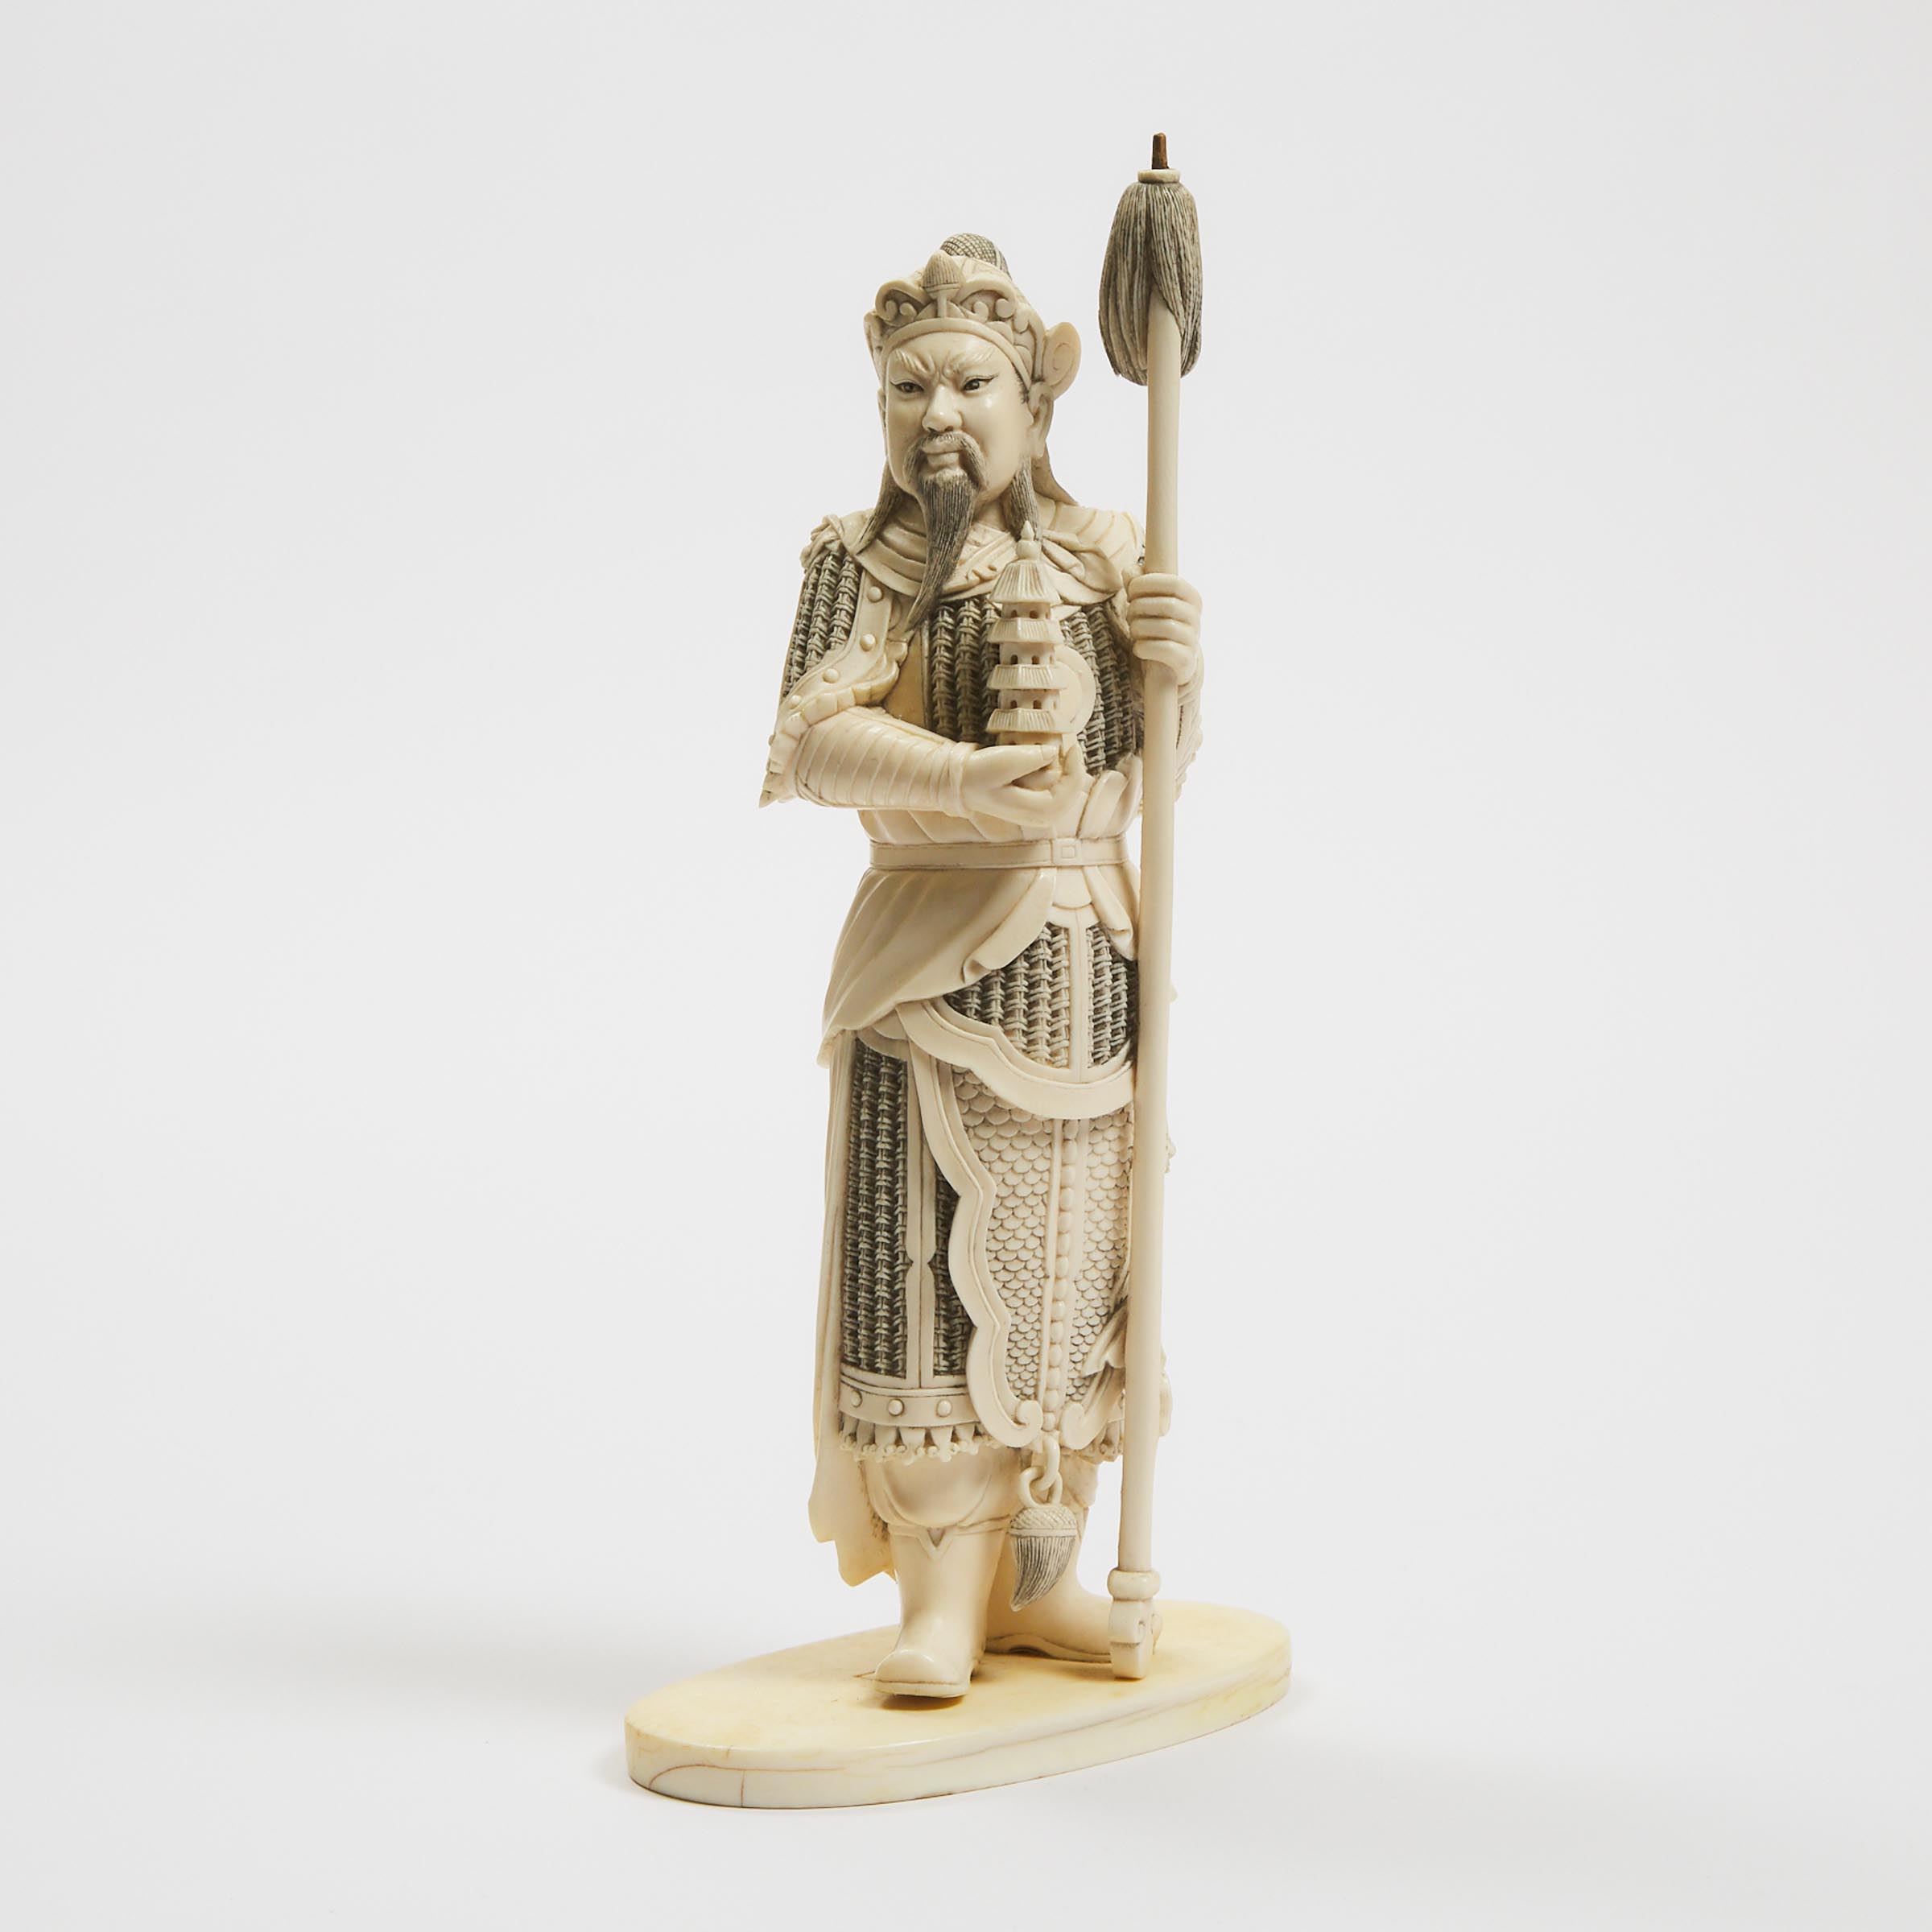 An Ivory Figure of a Heavenly King, Mid 20th Century